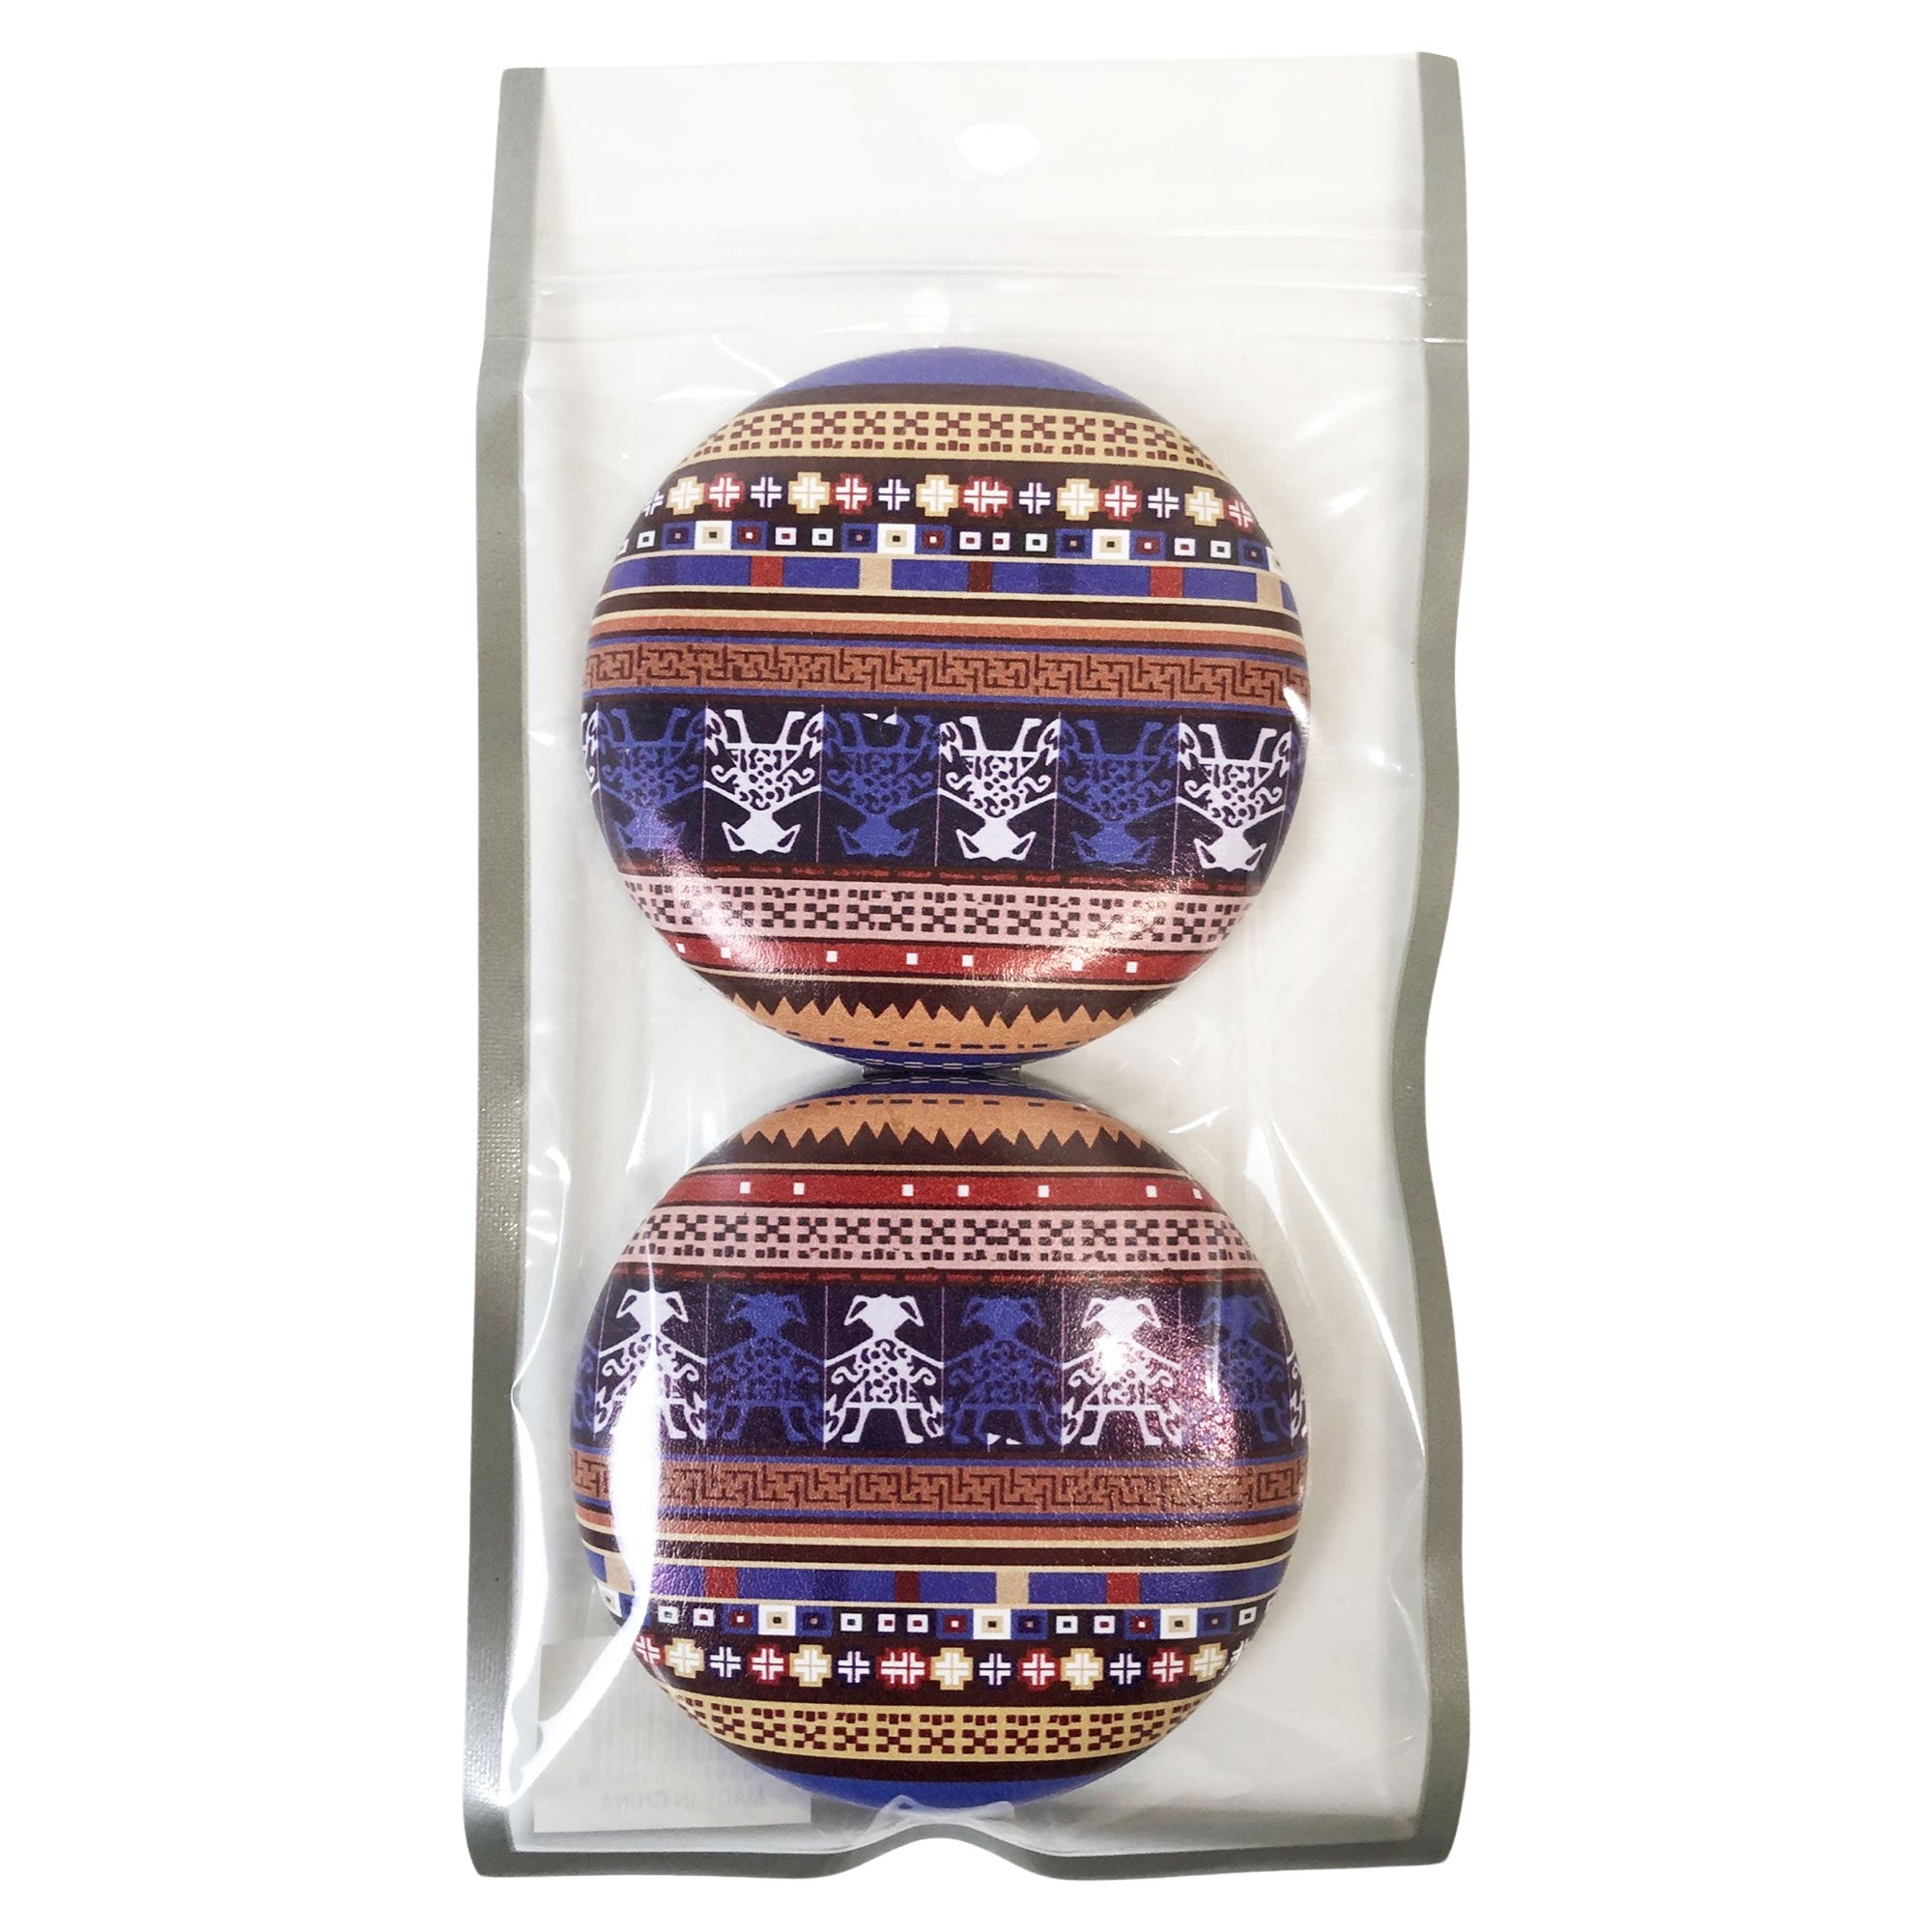 CLEARANCE COSMETIC MIRRORS NATIONAL PRINTS (CASE OF 48 - $1.50 / PIECE)  Wholesale Round Cosmetic Mirrors in Assorted Prints SKU: 906-NATIONAL-48